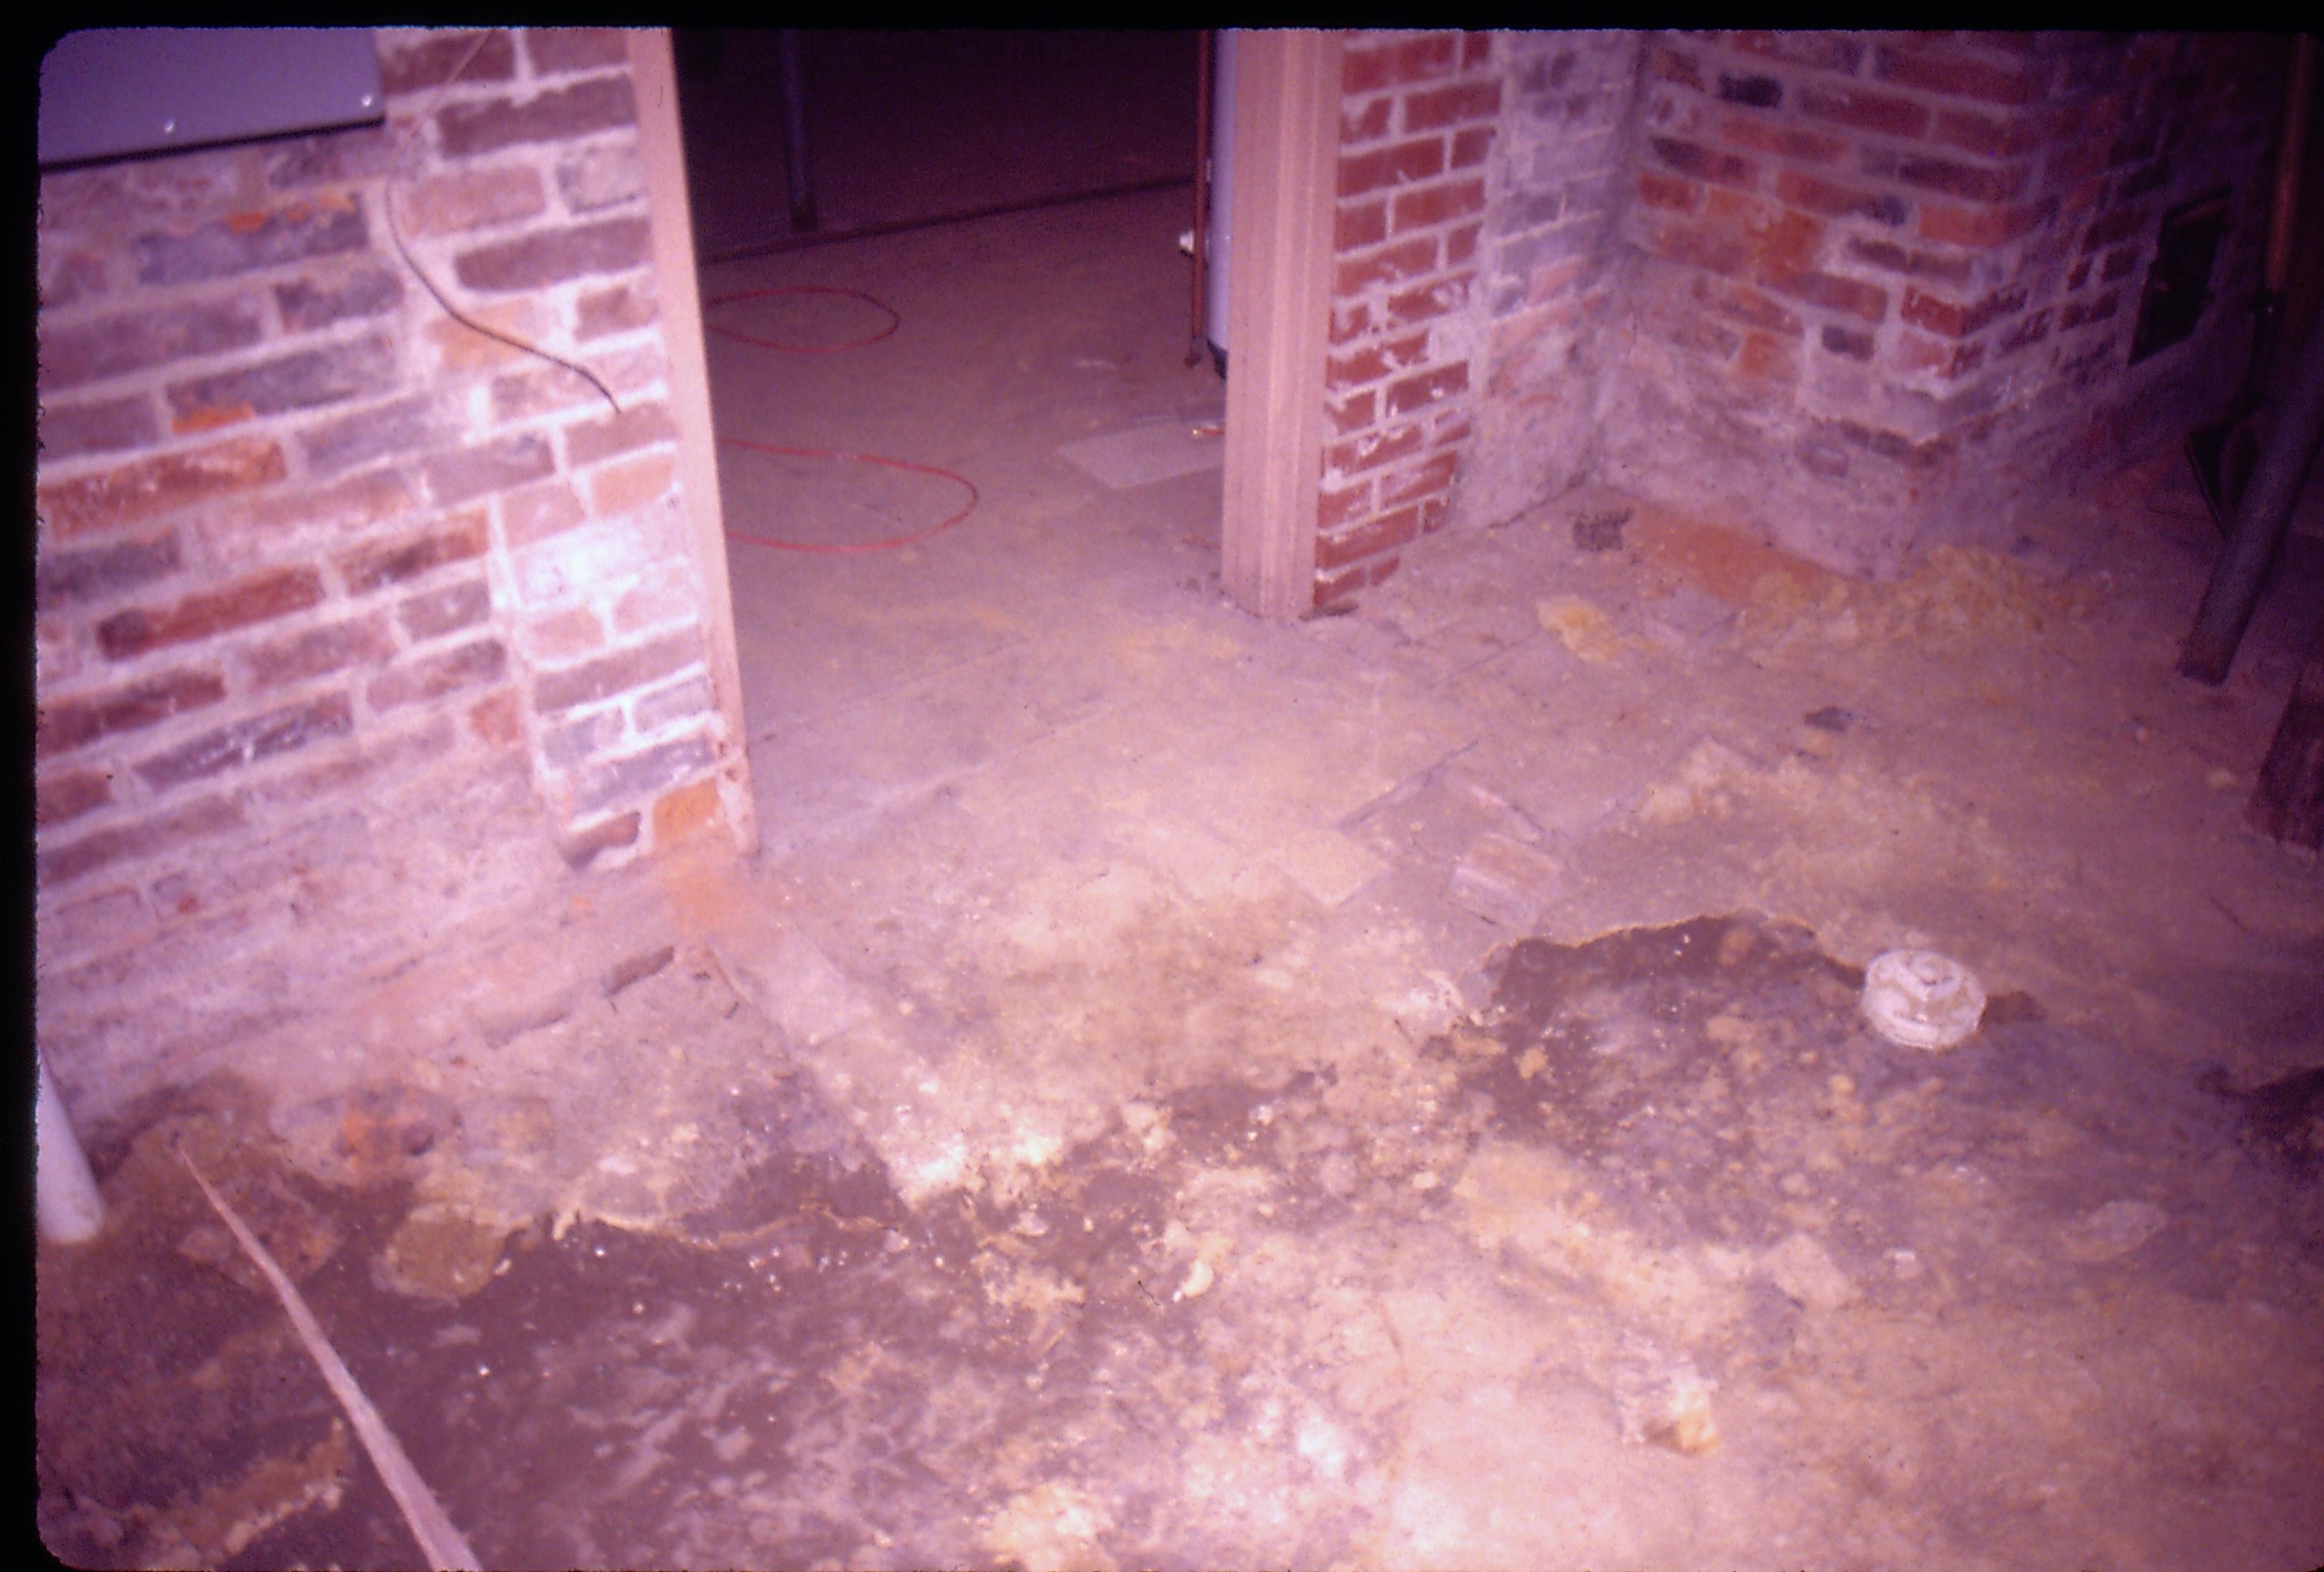 Lyon House - basement, floor and wall leading into furnace room in background. Floor is mix of dirt and old brick in a pattern, white capped drain on right. Brick walls visible with doorway leading to furnace room.  Furnace room appears to have concrete floor. Extension cord visible on floor in furnace room Looking Northwest from basement Lyon, Basement, brick floor, brick wall, furnace